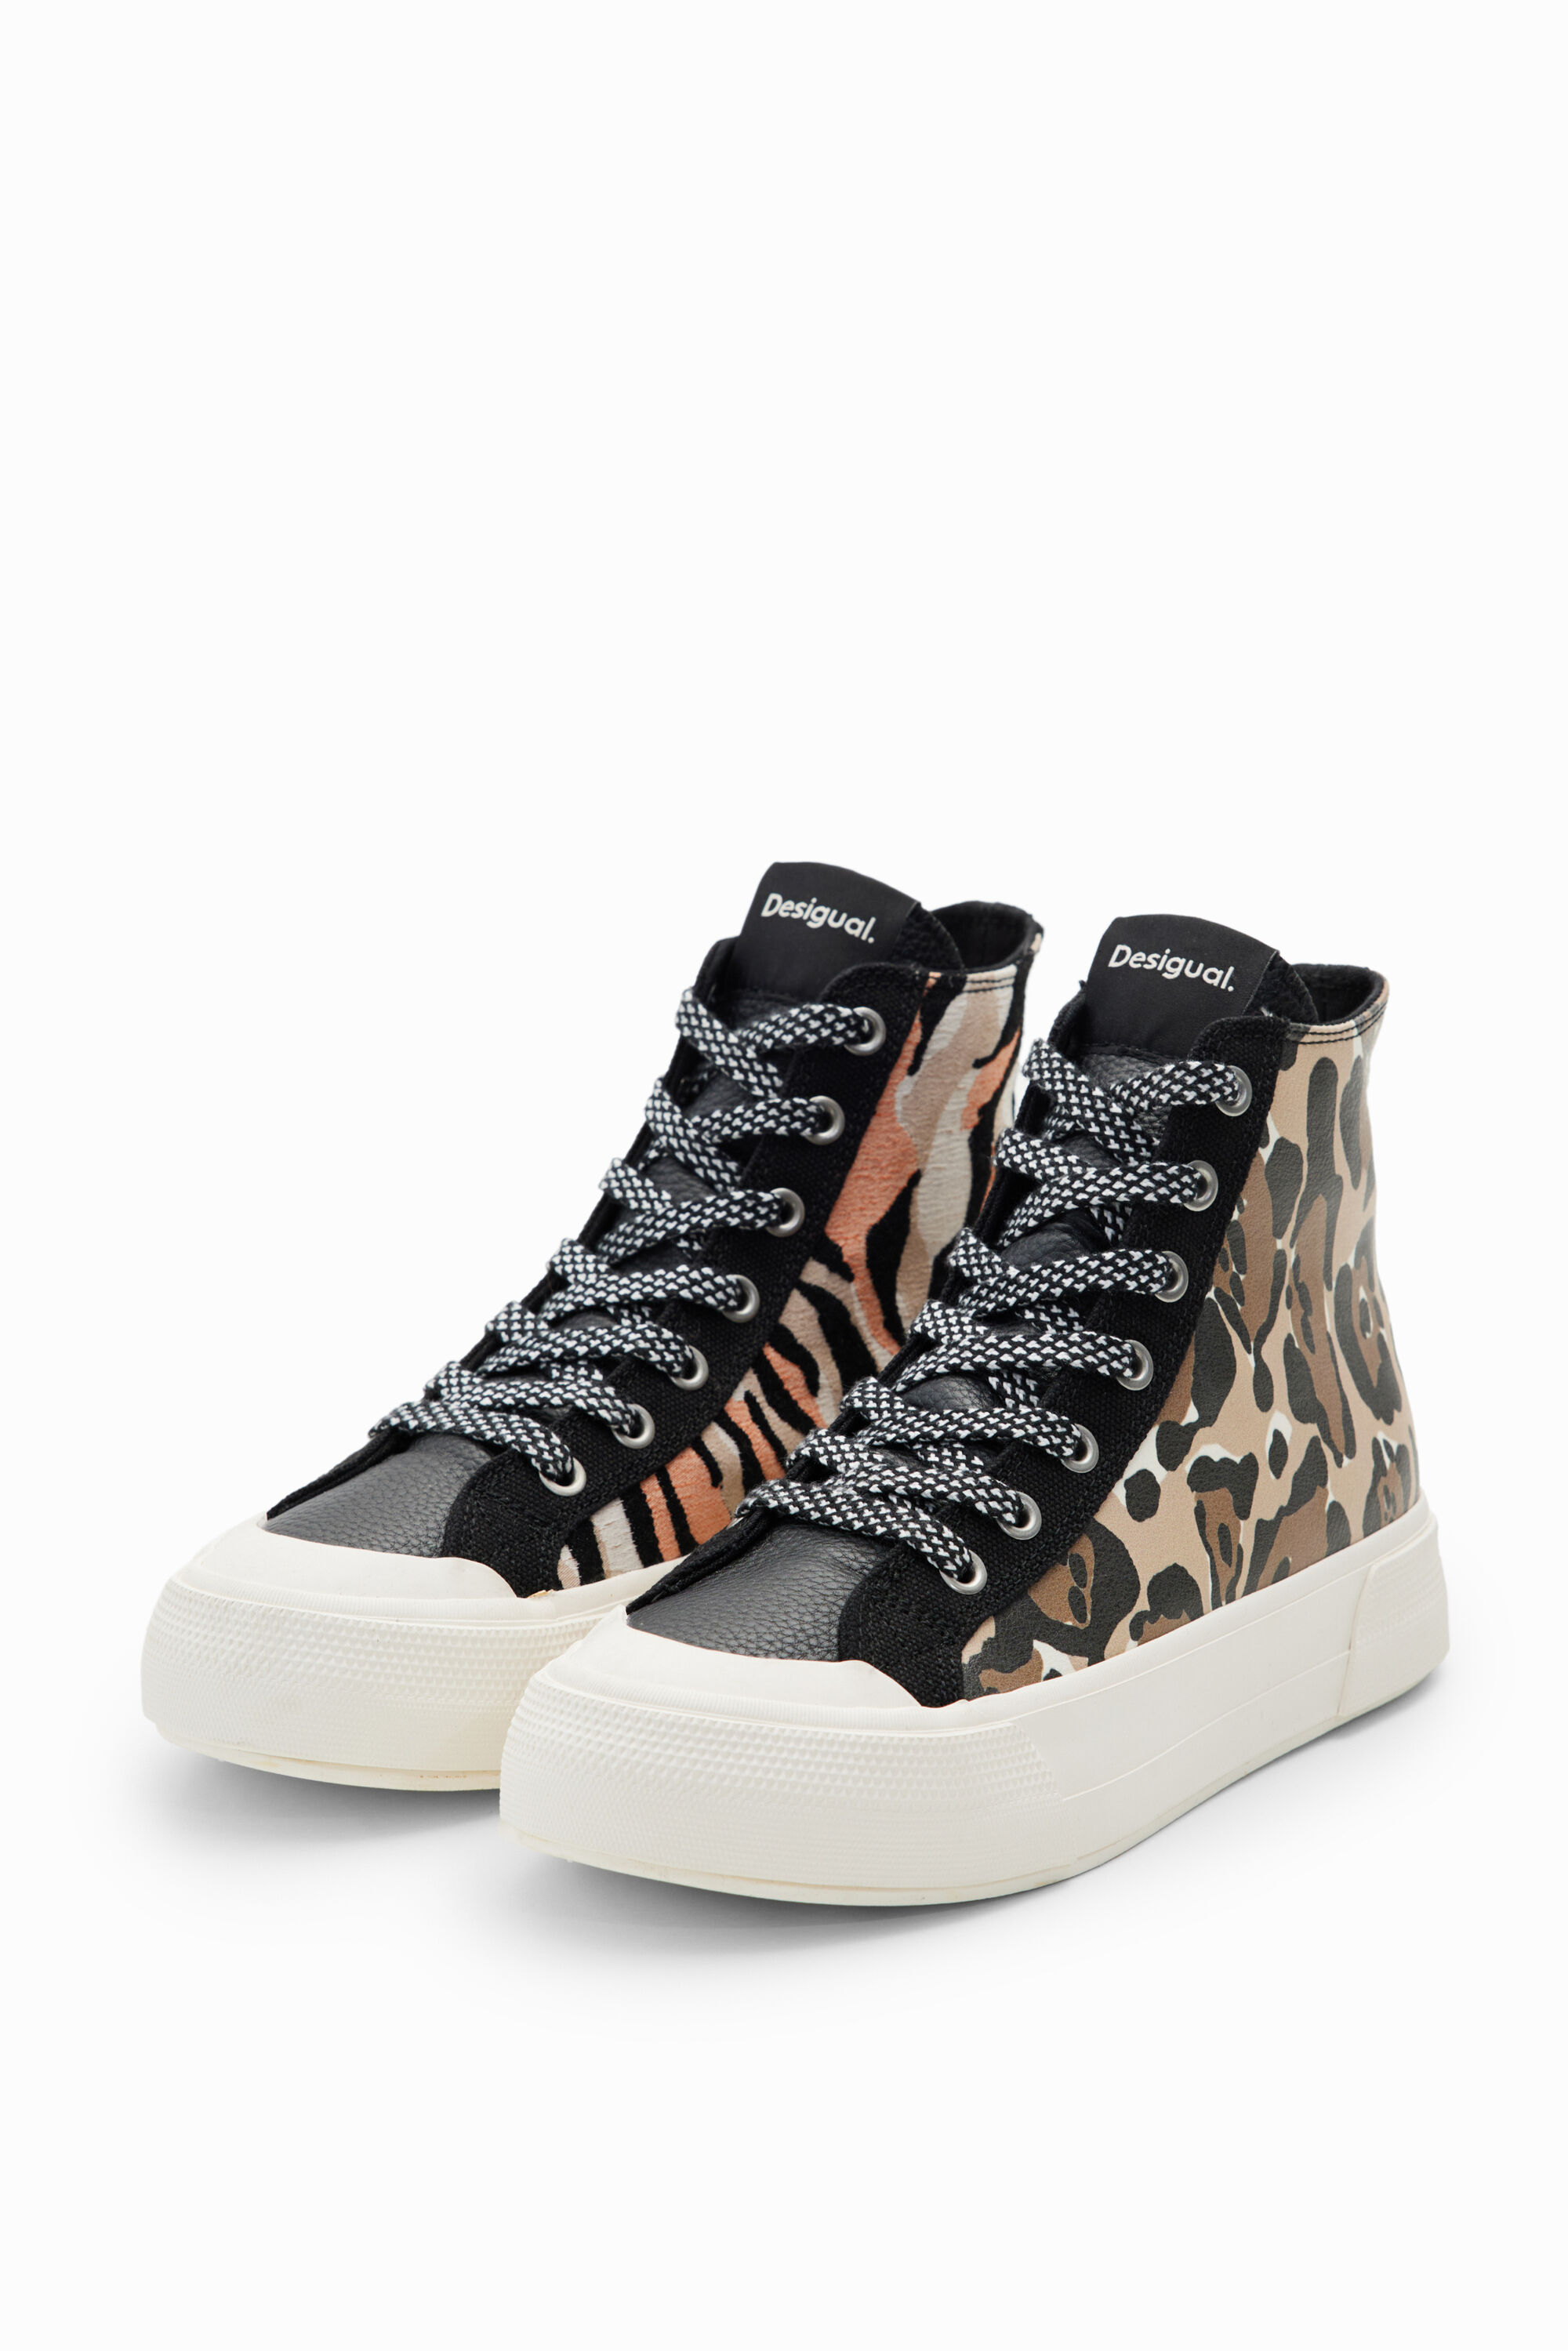 High-top animal print sneakers - MATERIAL FINISHES - 39